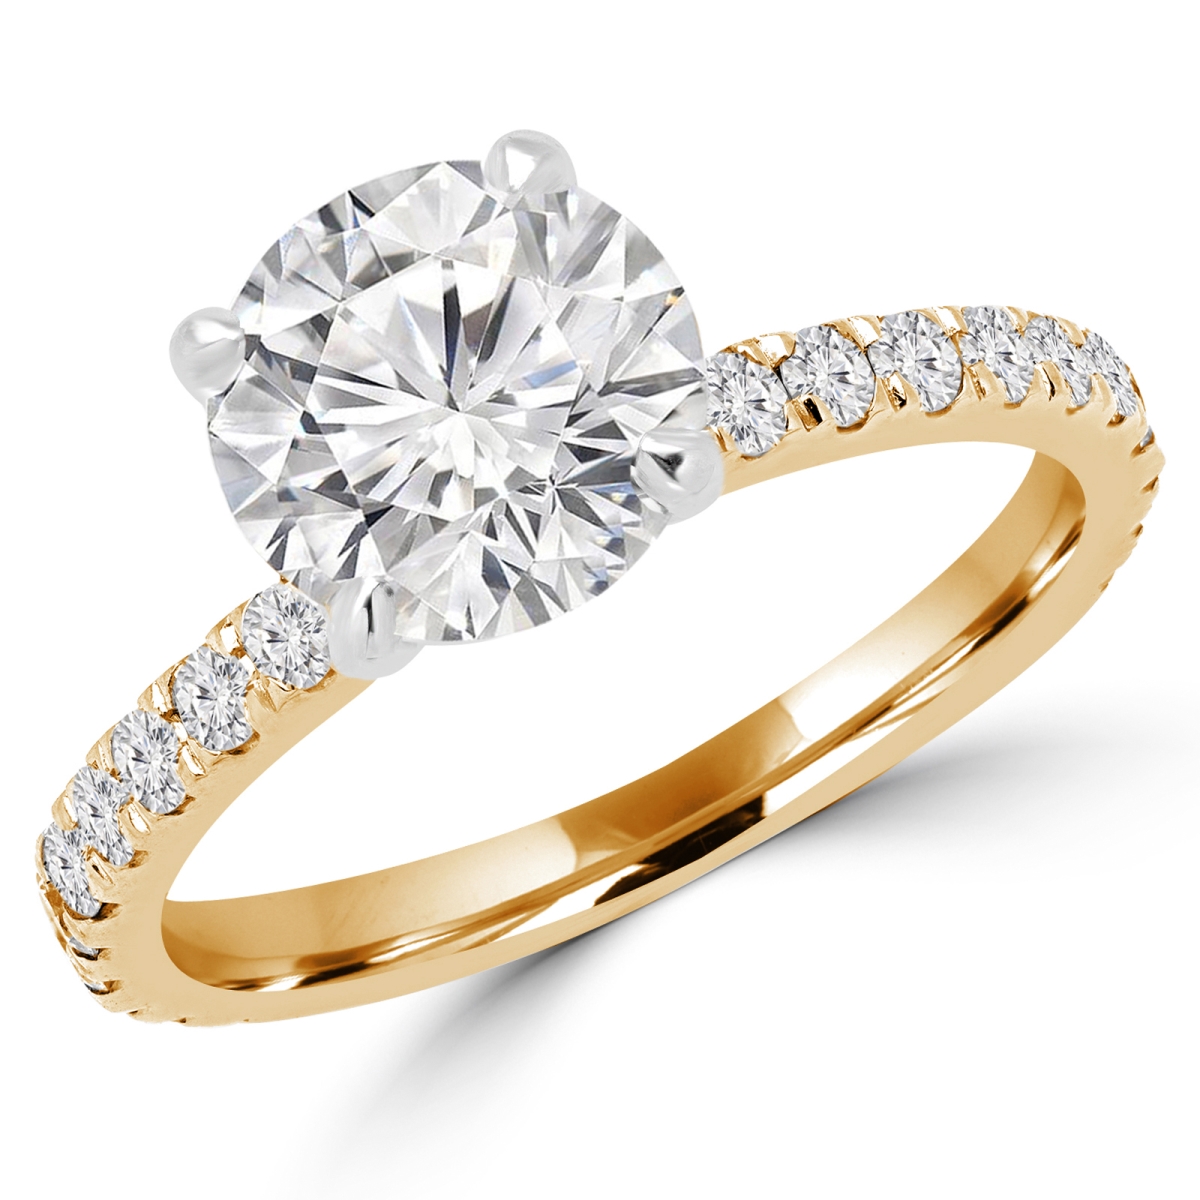 Picture of Majesty Diamonds MD160340-3.5 1 CTW Round Cut Diamond Multi Stone Engagement Ring in 14K Yellow Gold - Size 3.5